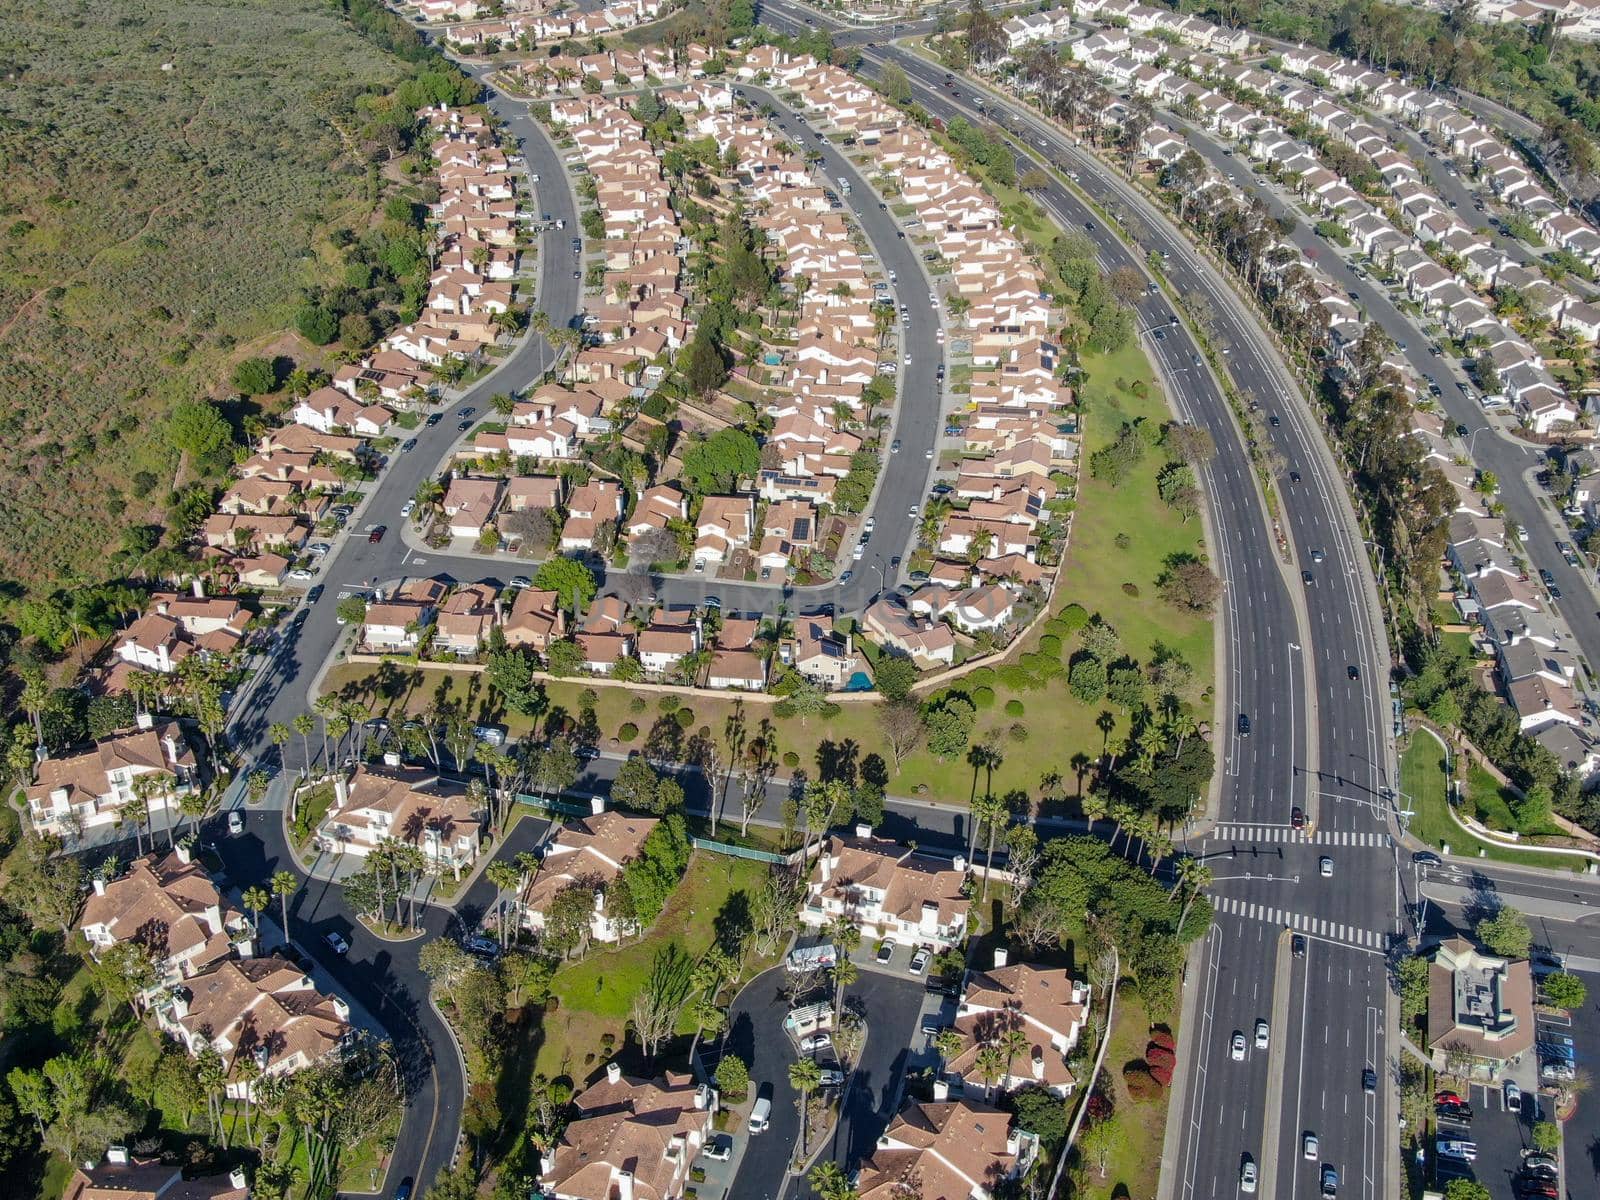 Aerial view of upper middle class neighborhood with big villas around in San Diego, California, USA.